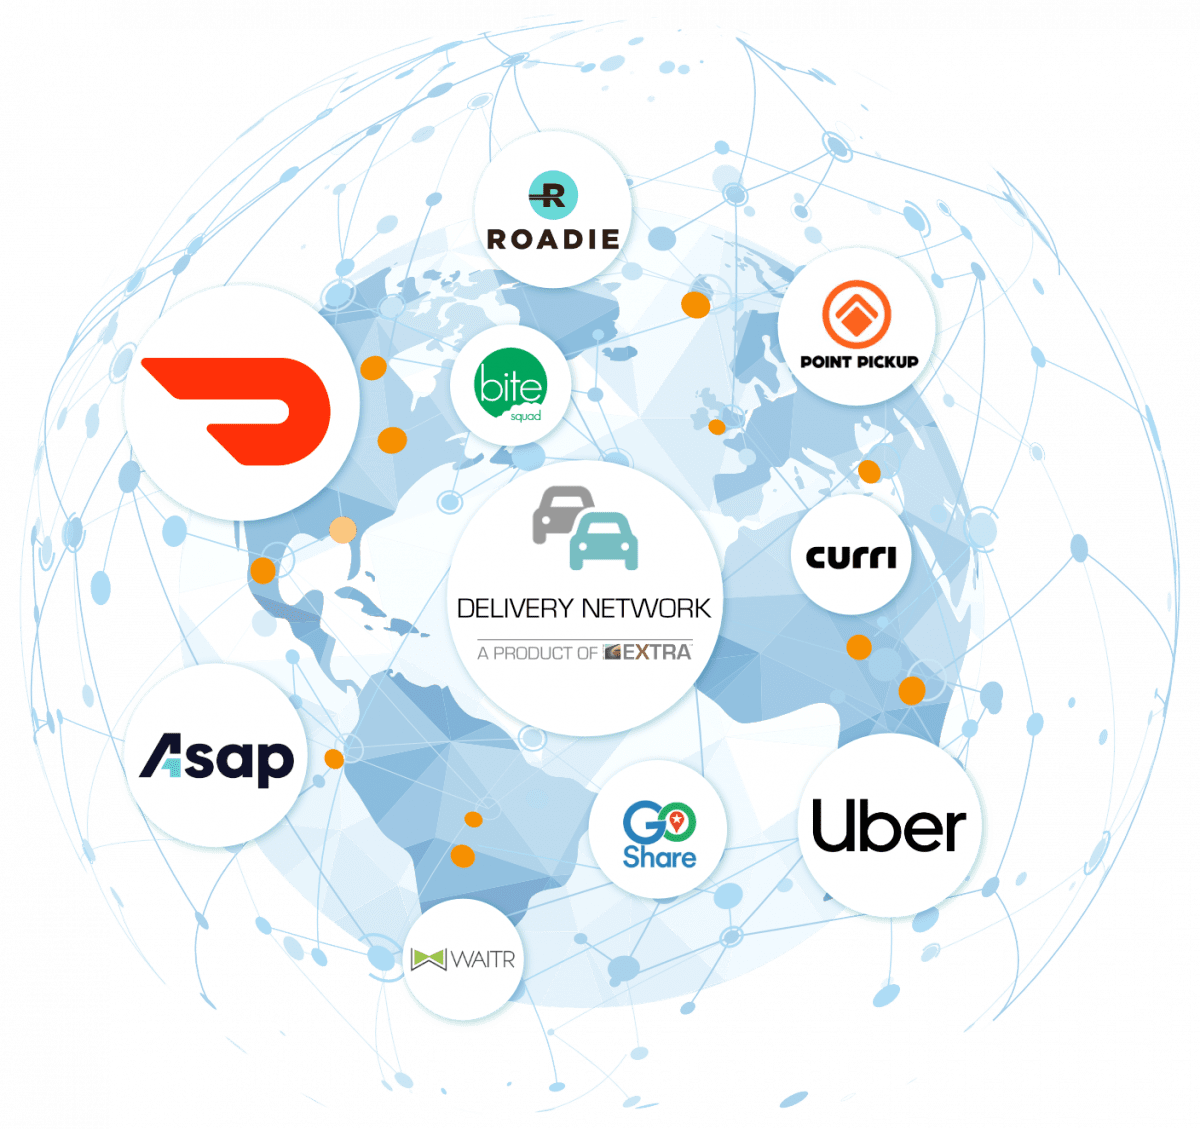 Delivery Network provider logos overlaid over a globe network graphic